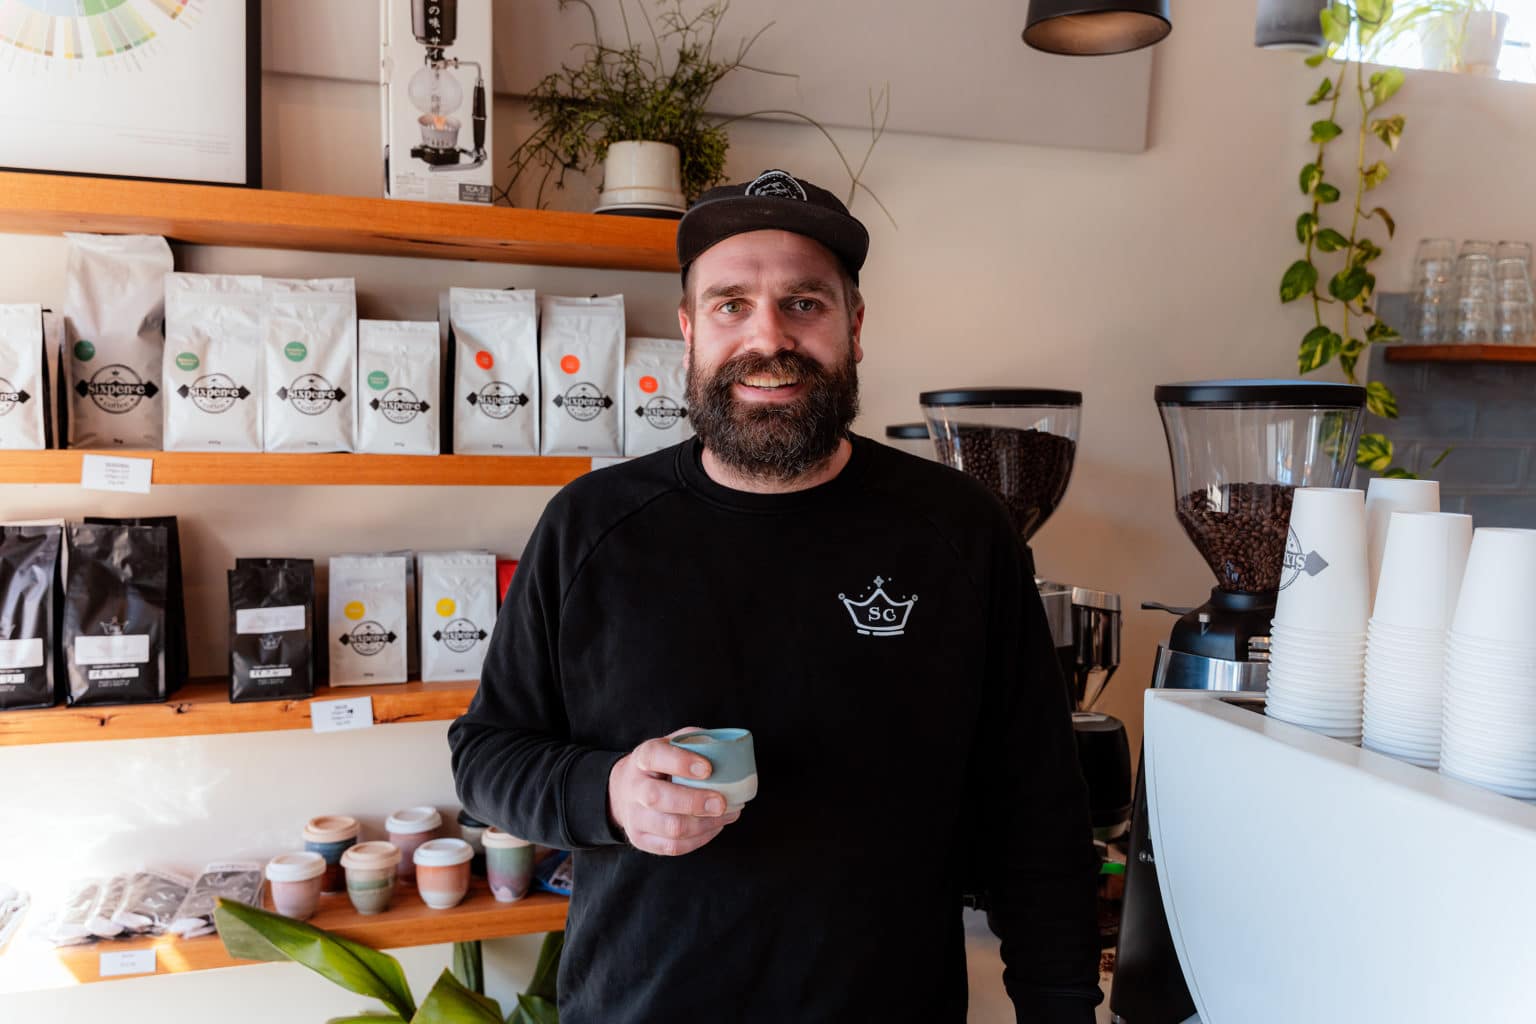 Luke, a male cafe owner and coffee roaster, stands with a ceramic mug in front of a coffee machine.